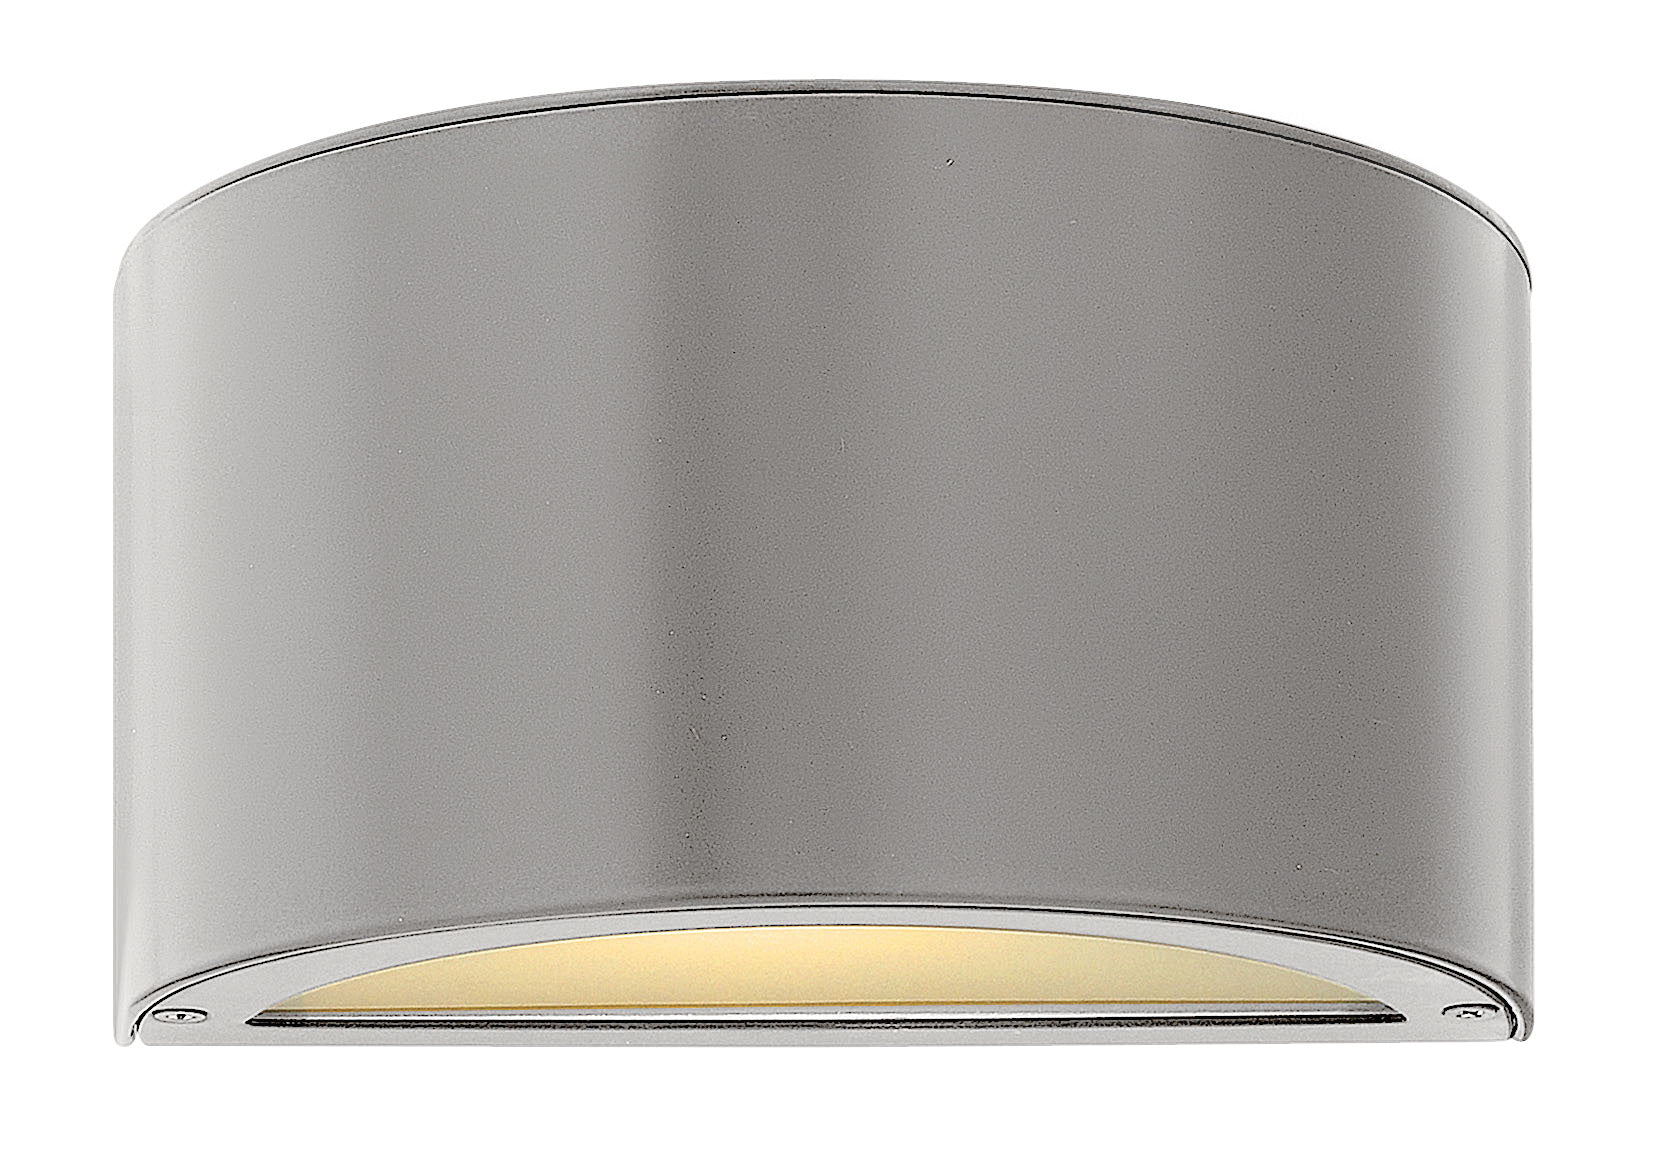 LUNA Outdoor sconce Stainless steel INTEGRATED LED - 1662TT | HINKLEY